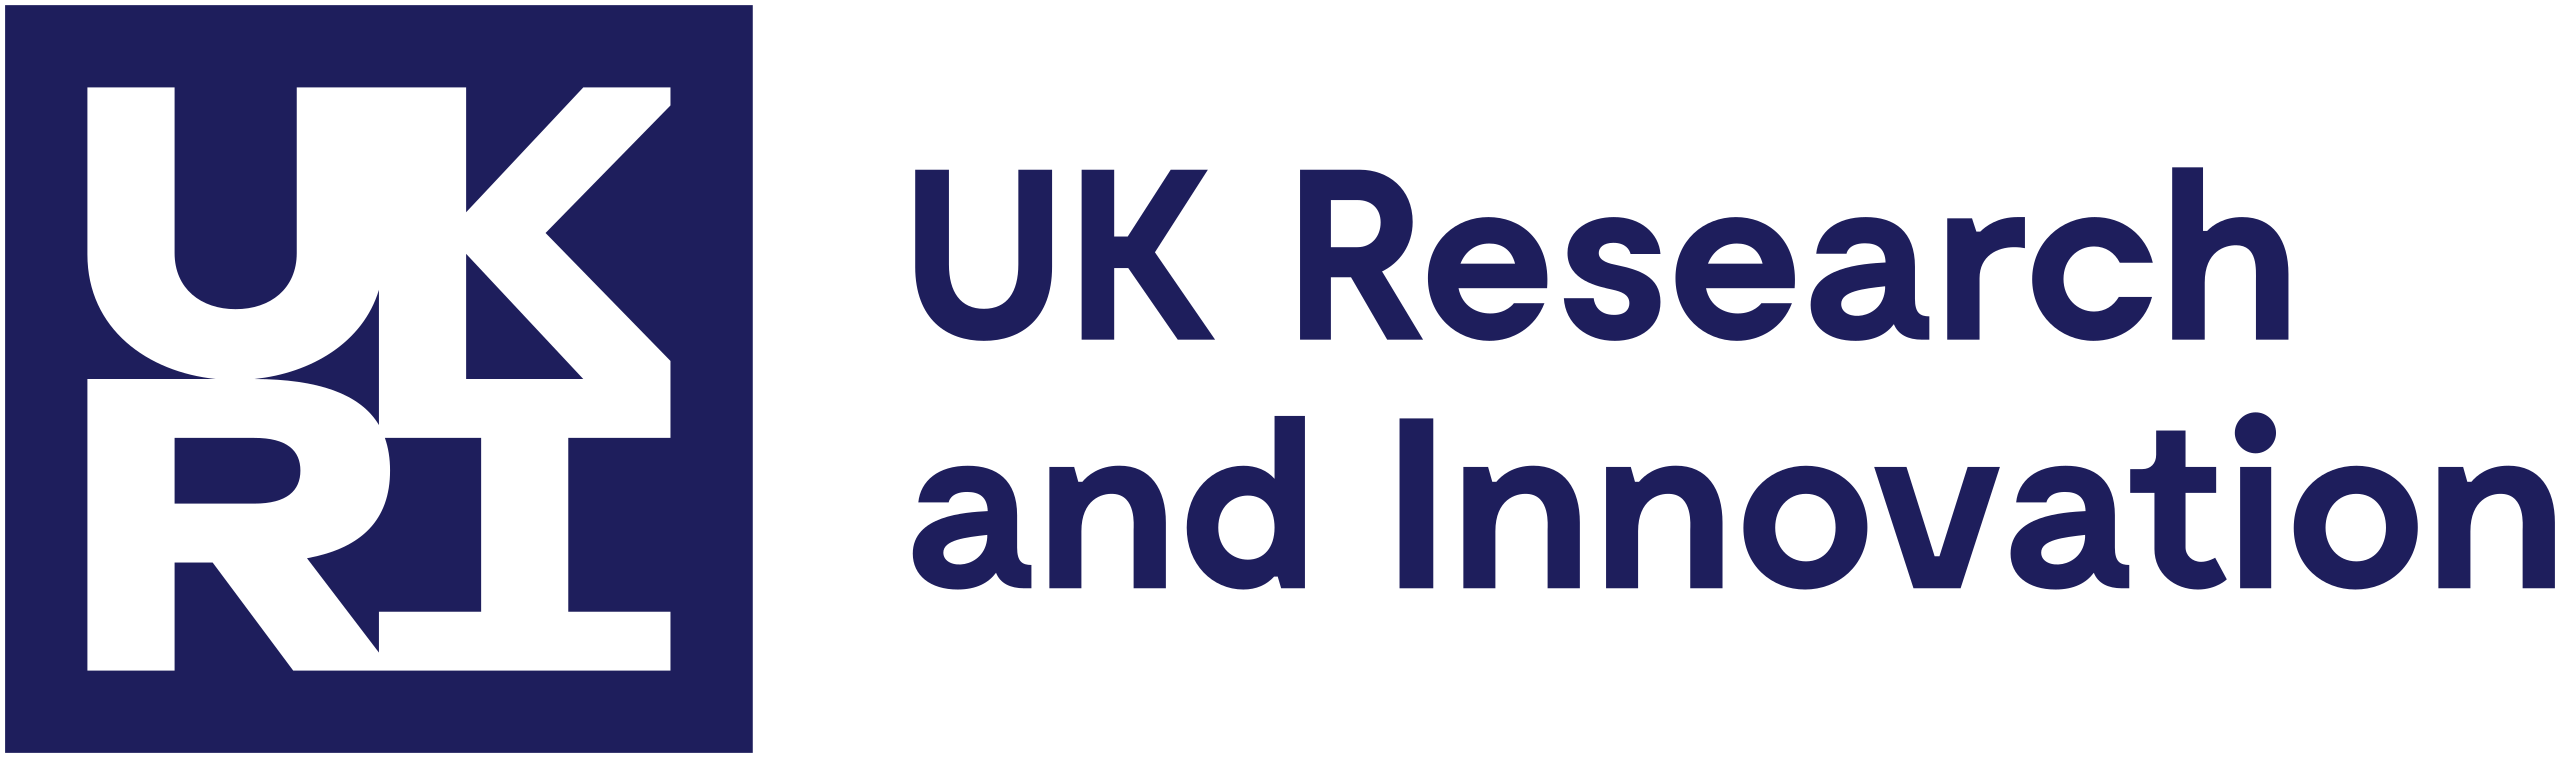 UK_Research_and_Innovation_logo